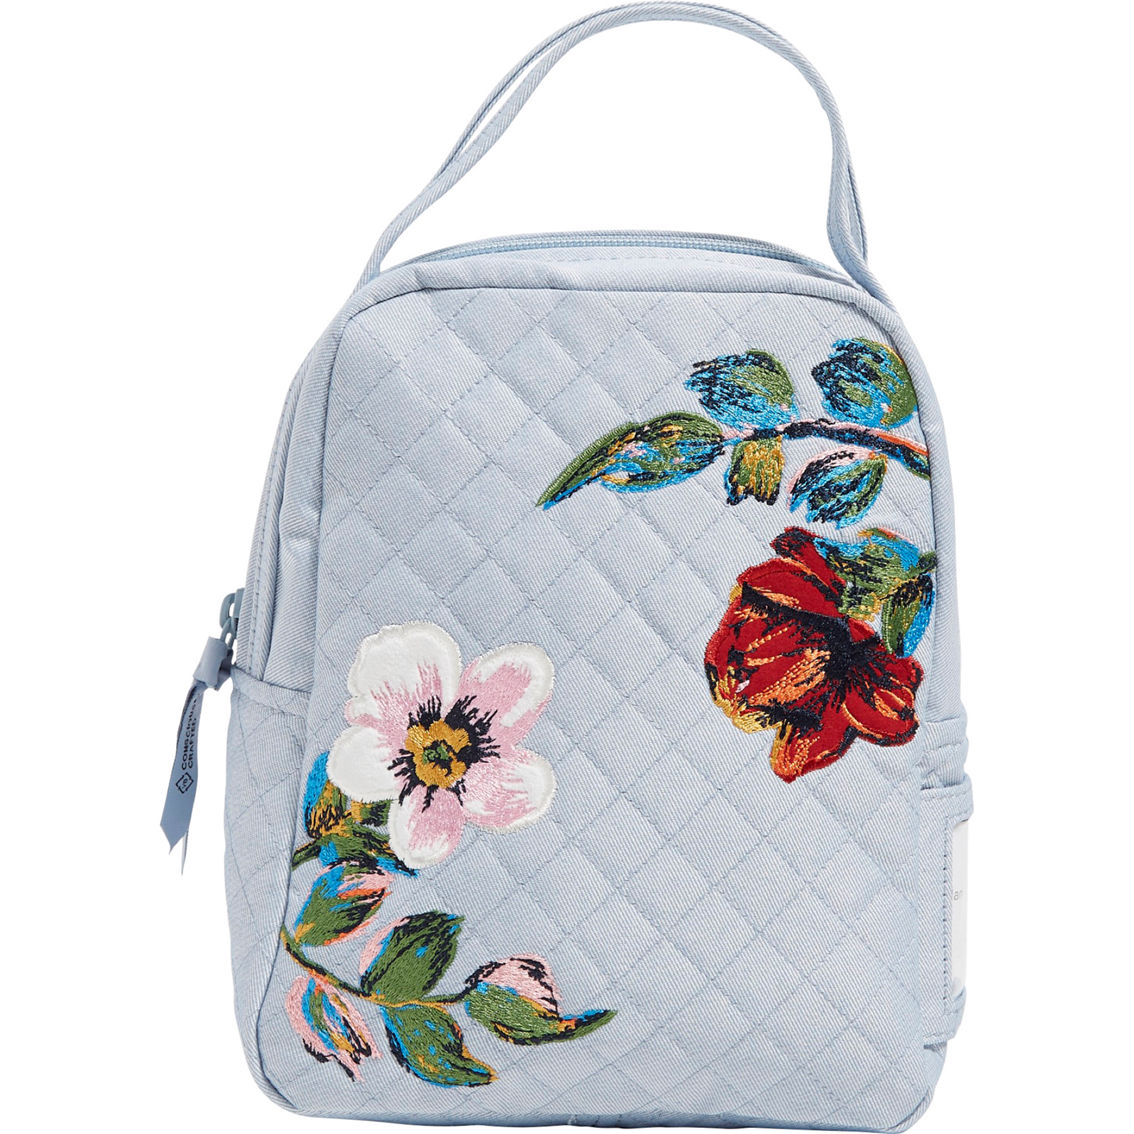 Vera Bradley Sea Air Floral Lunch Bunch - Image 1 of 3